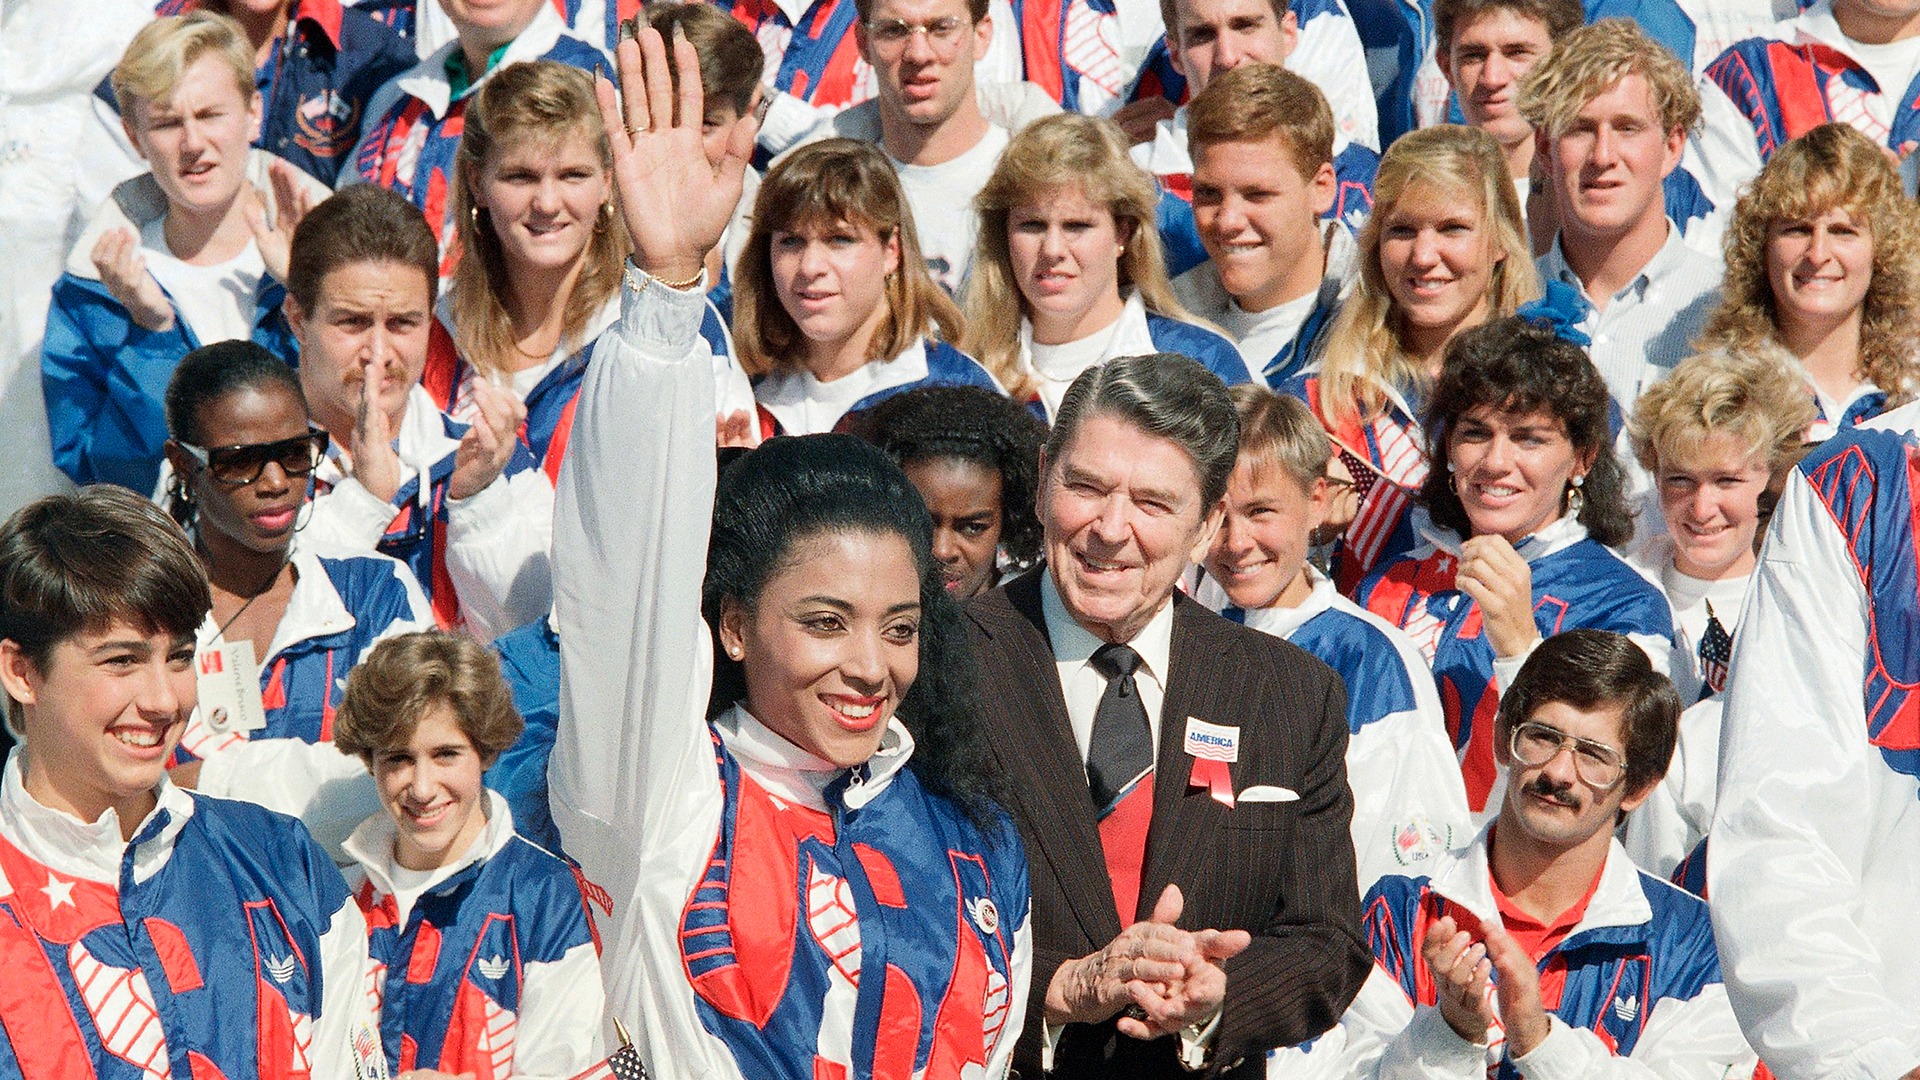 Olympic gold medalist Florence Griffith Joyner is applauded by President Ronald Reagan